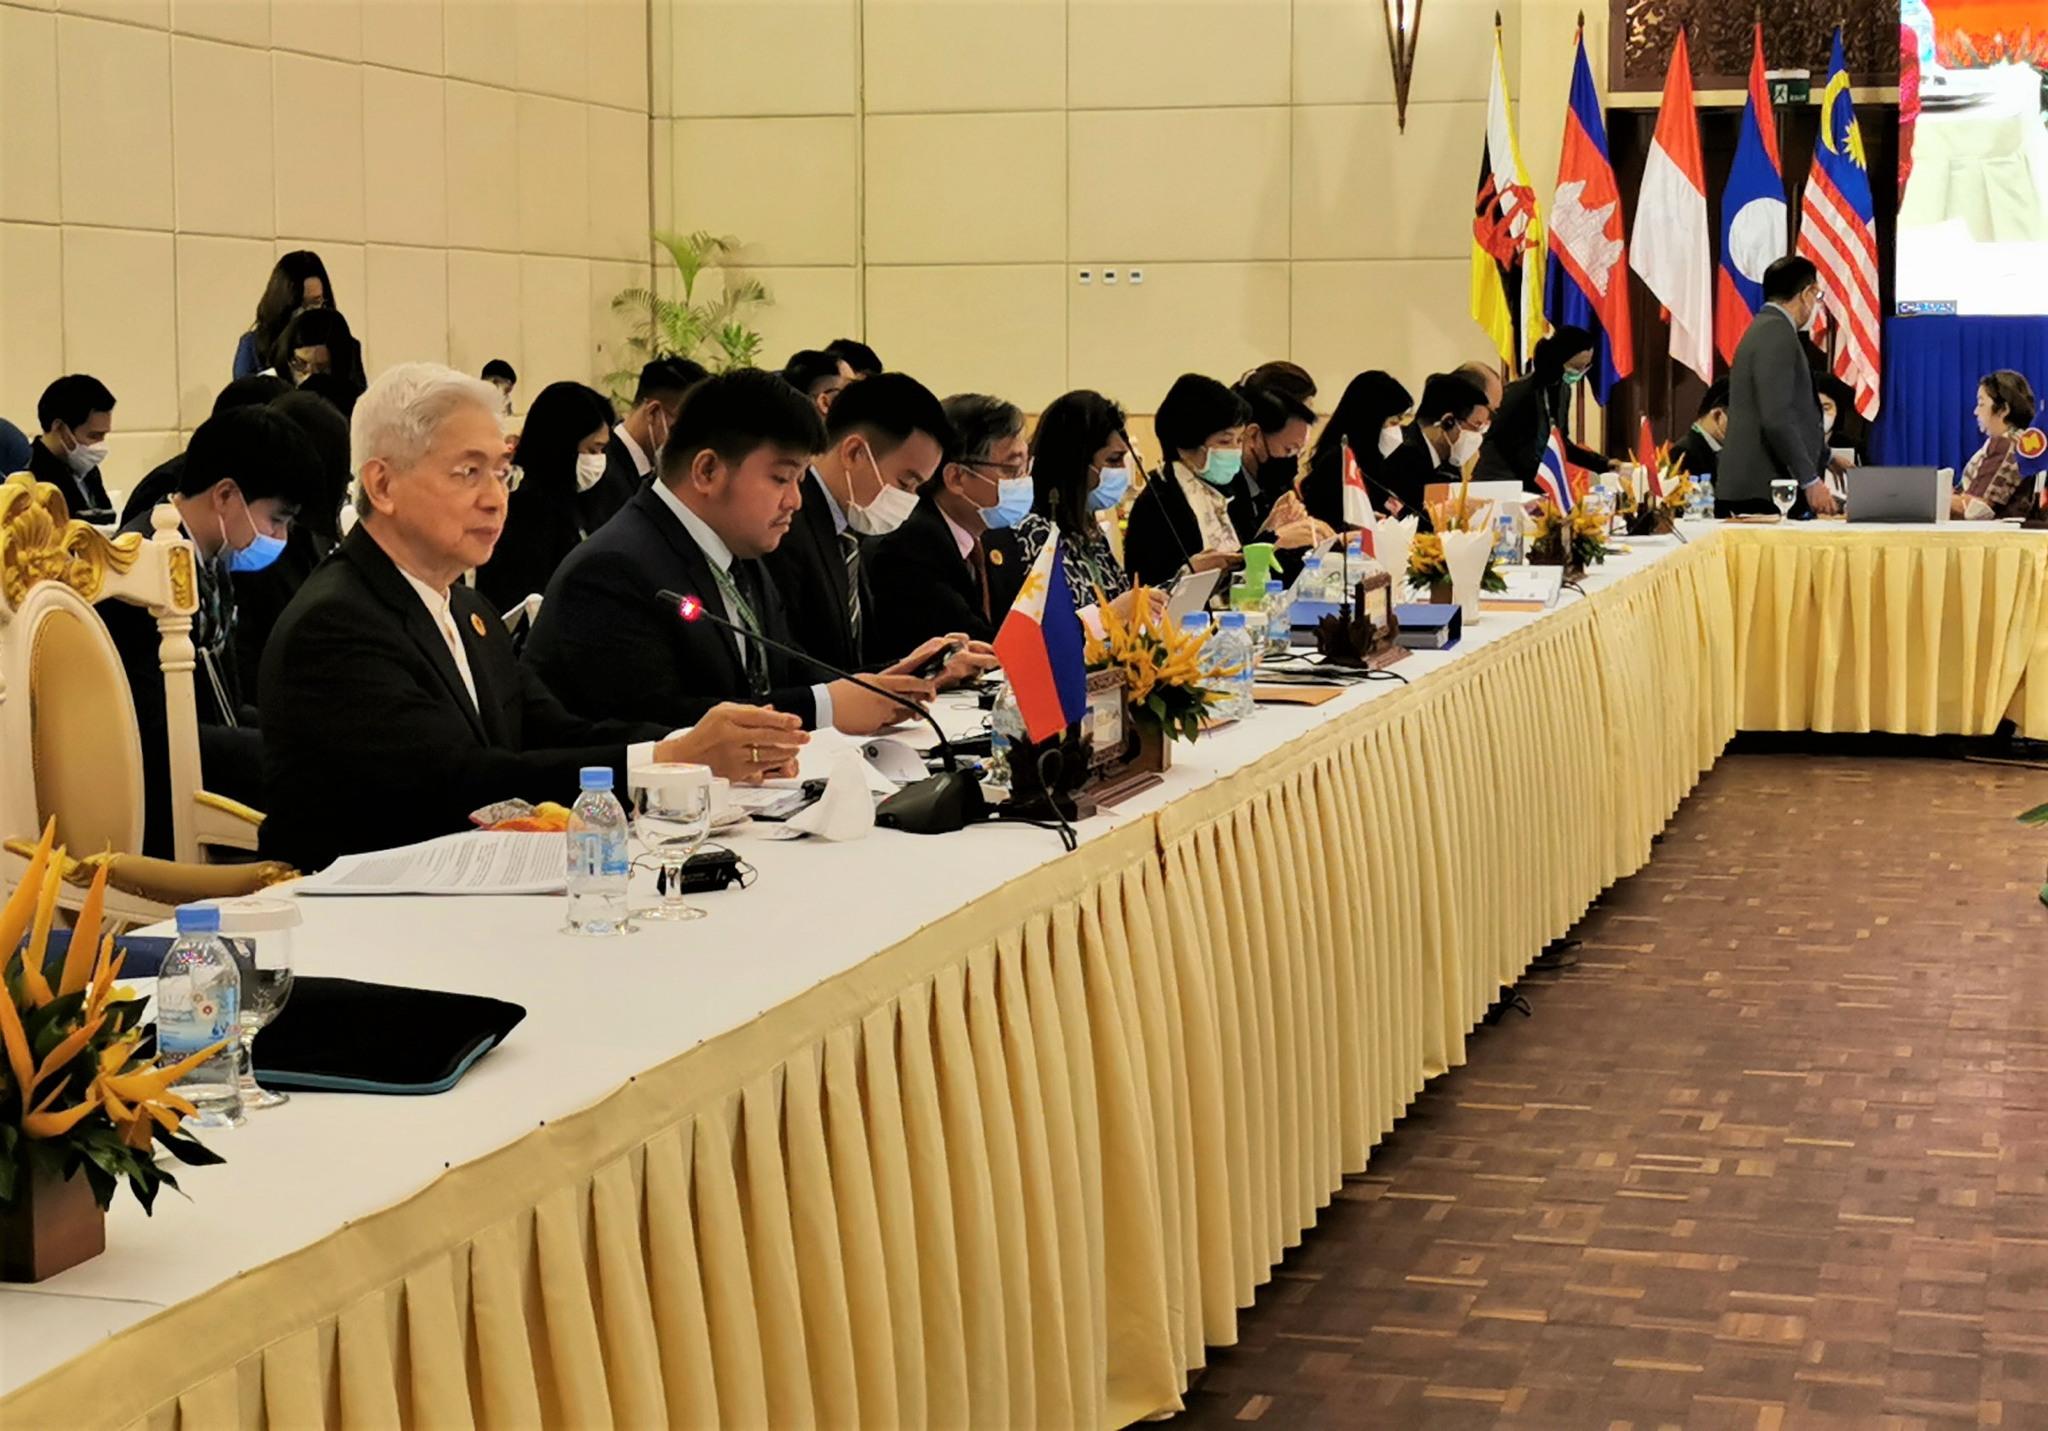 Trade Secretary Alfredo Pascual joined the ASEAN Economic Ministers and Senior Officials during the 54th ASEAN Economic Ministers (AEM) Meeting and Related Meetings held on 11-18 September 2022 in Siem Reap, Cambodia.